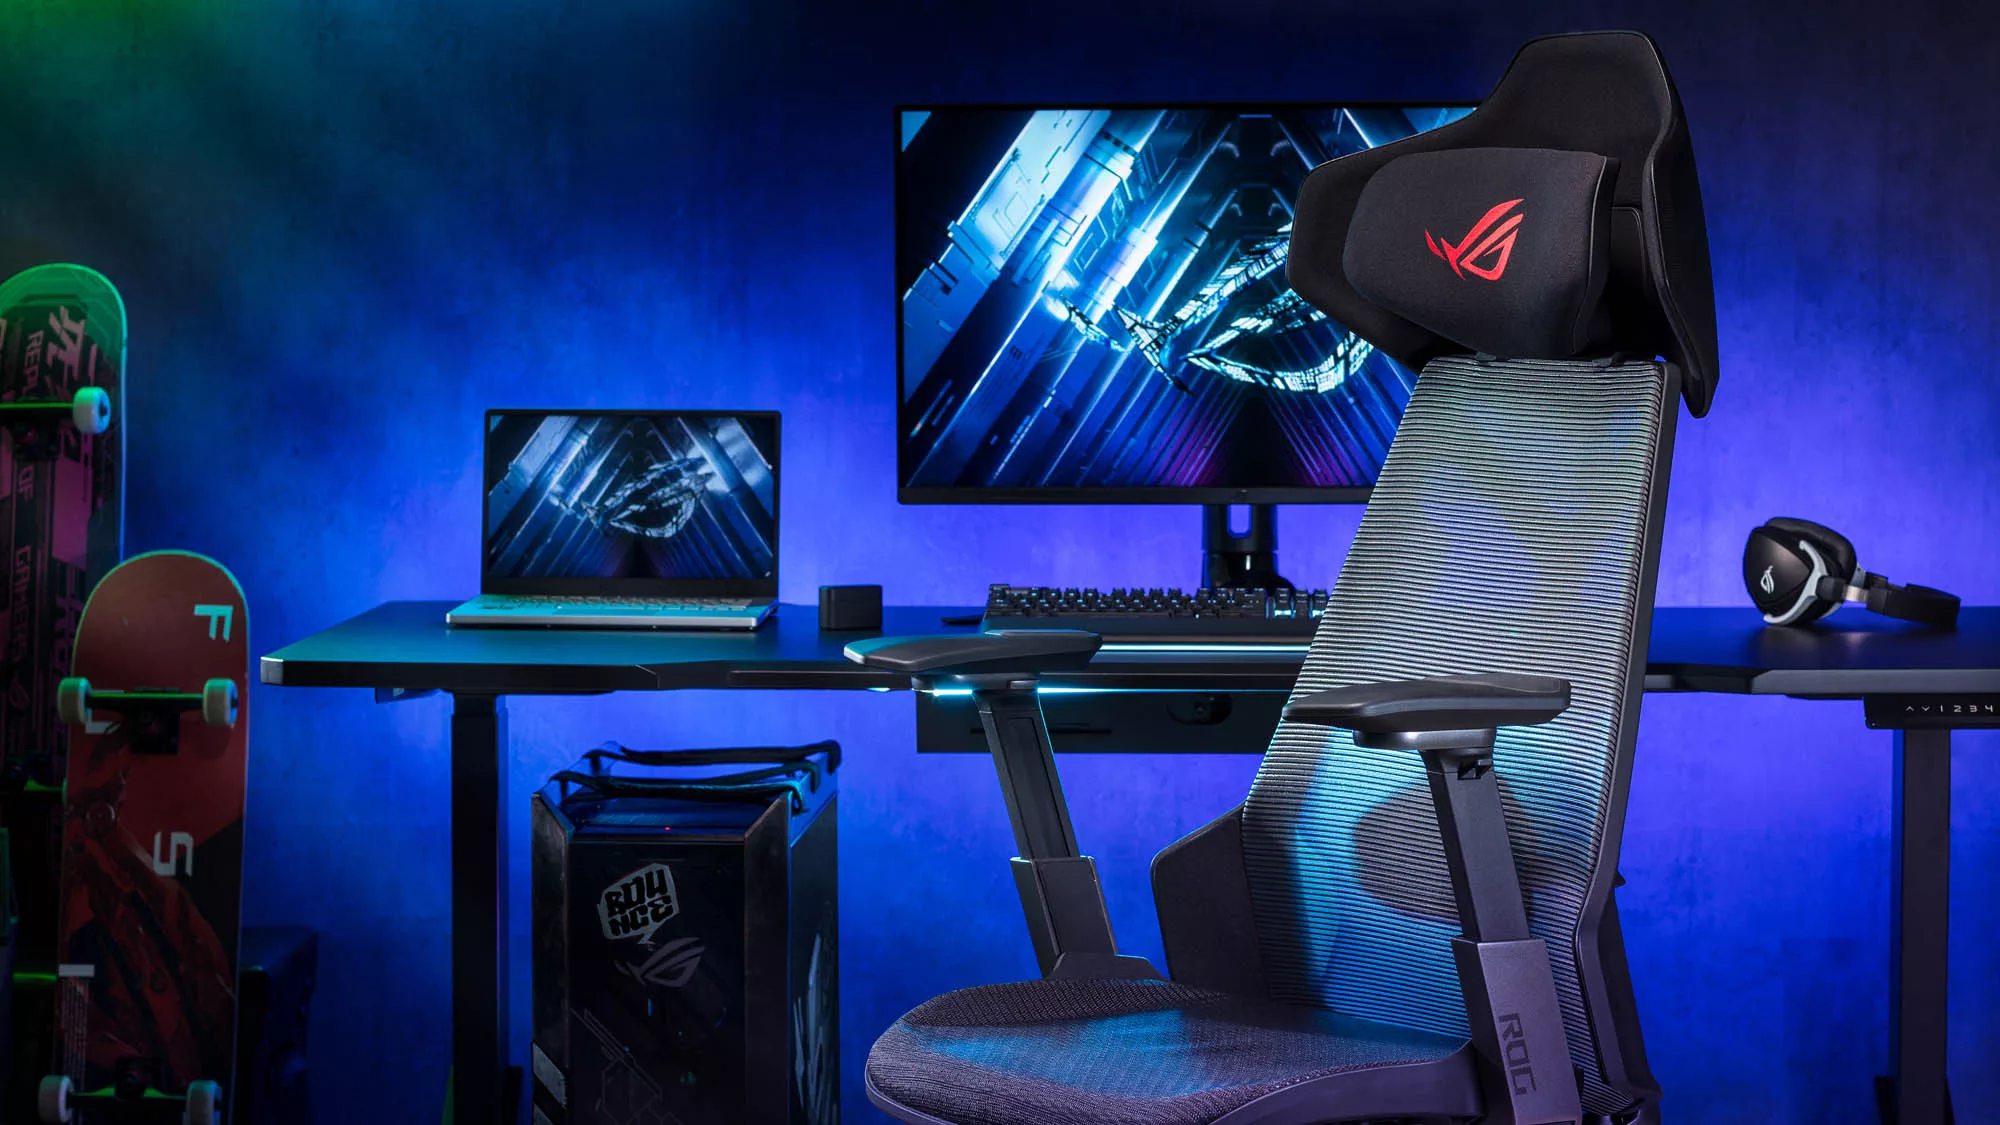 An ROG laptop and desktop setup alongside a pair of ROG headphones, and ROG chair, and skateboards against a purple wall.